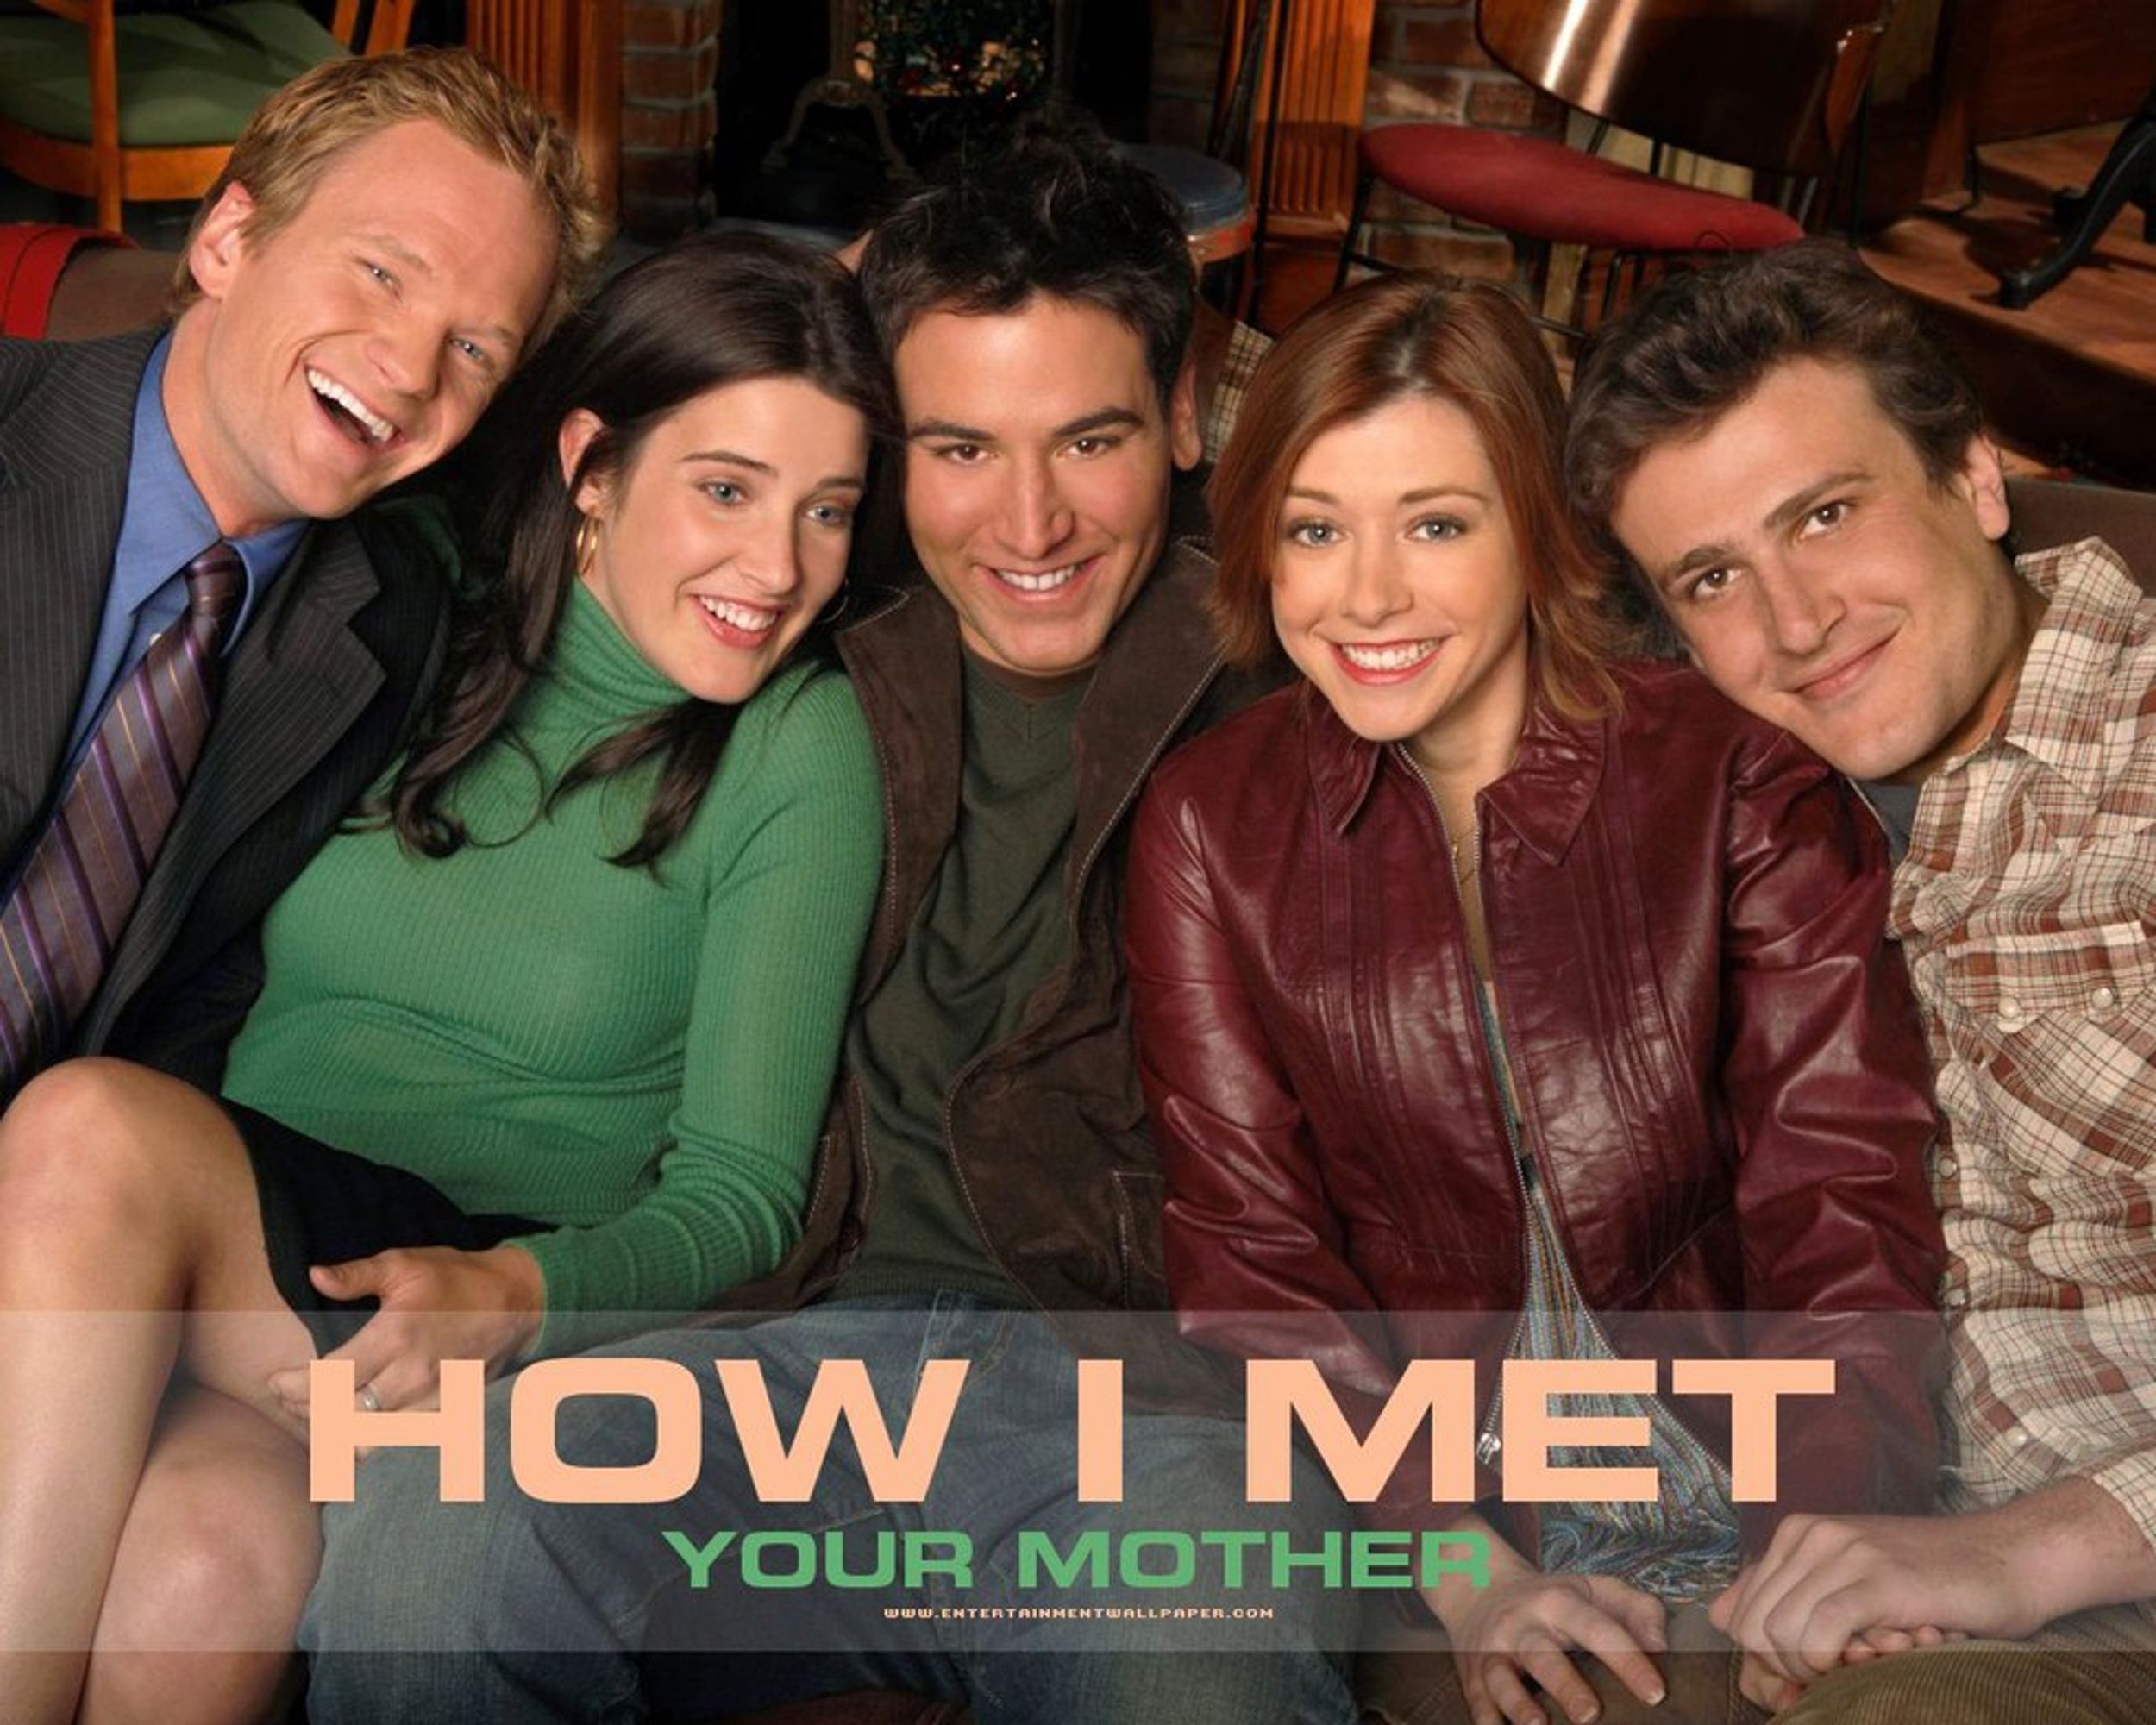 High School As Told By "How I Met Your Mother"